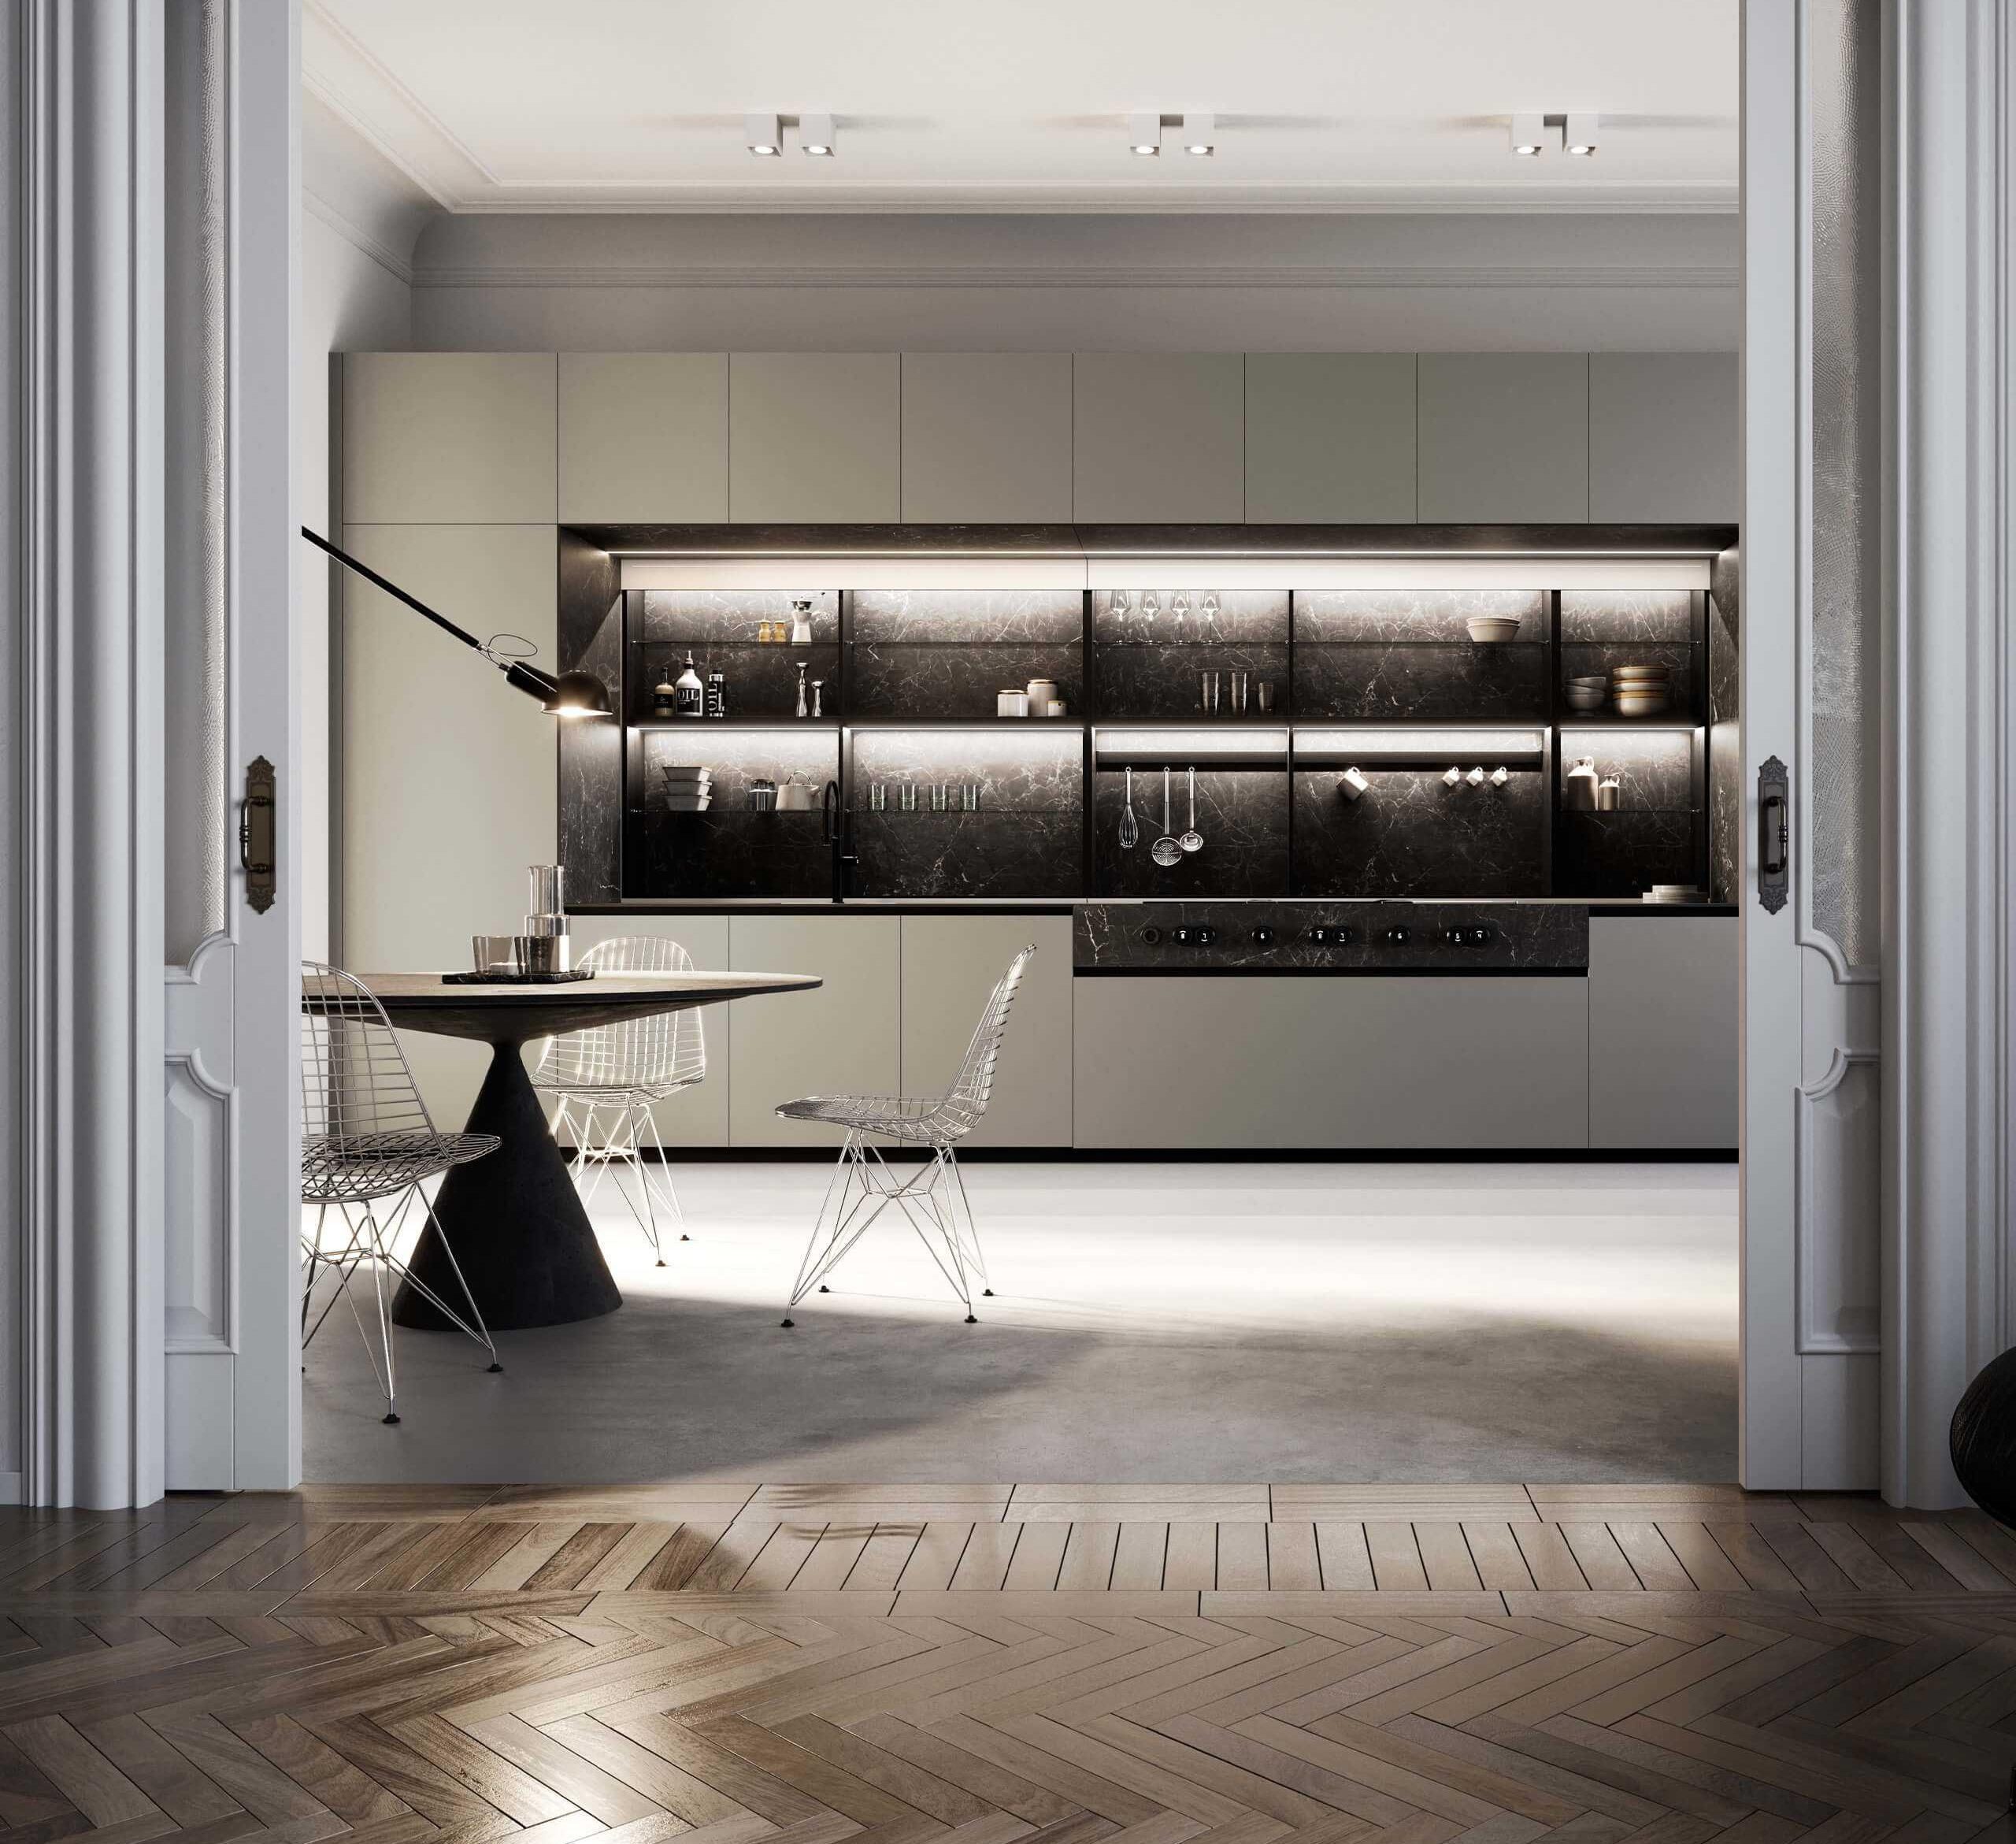 Kitchen by You - Cucine personalizzate